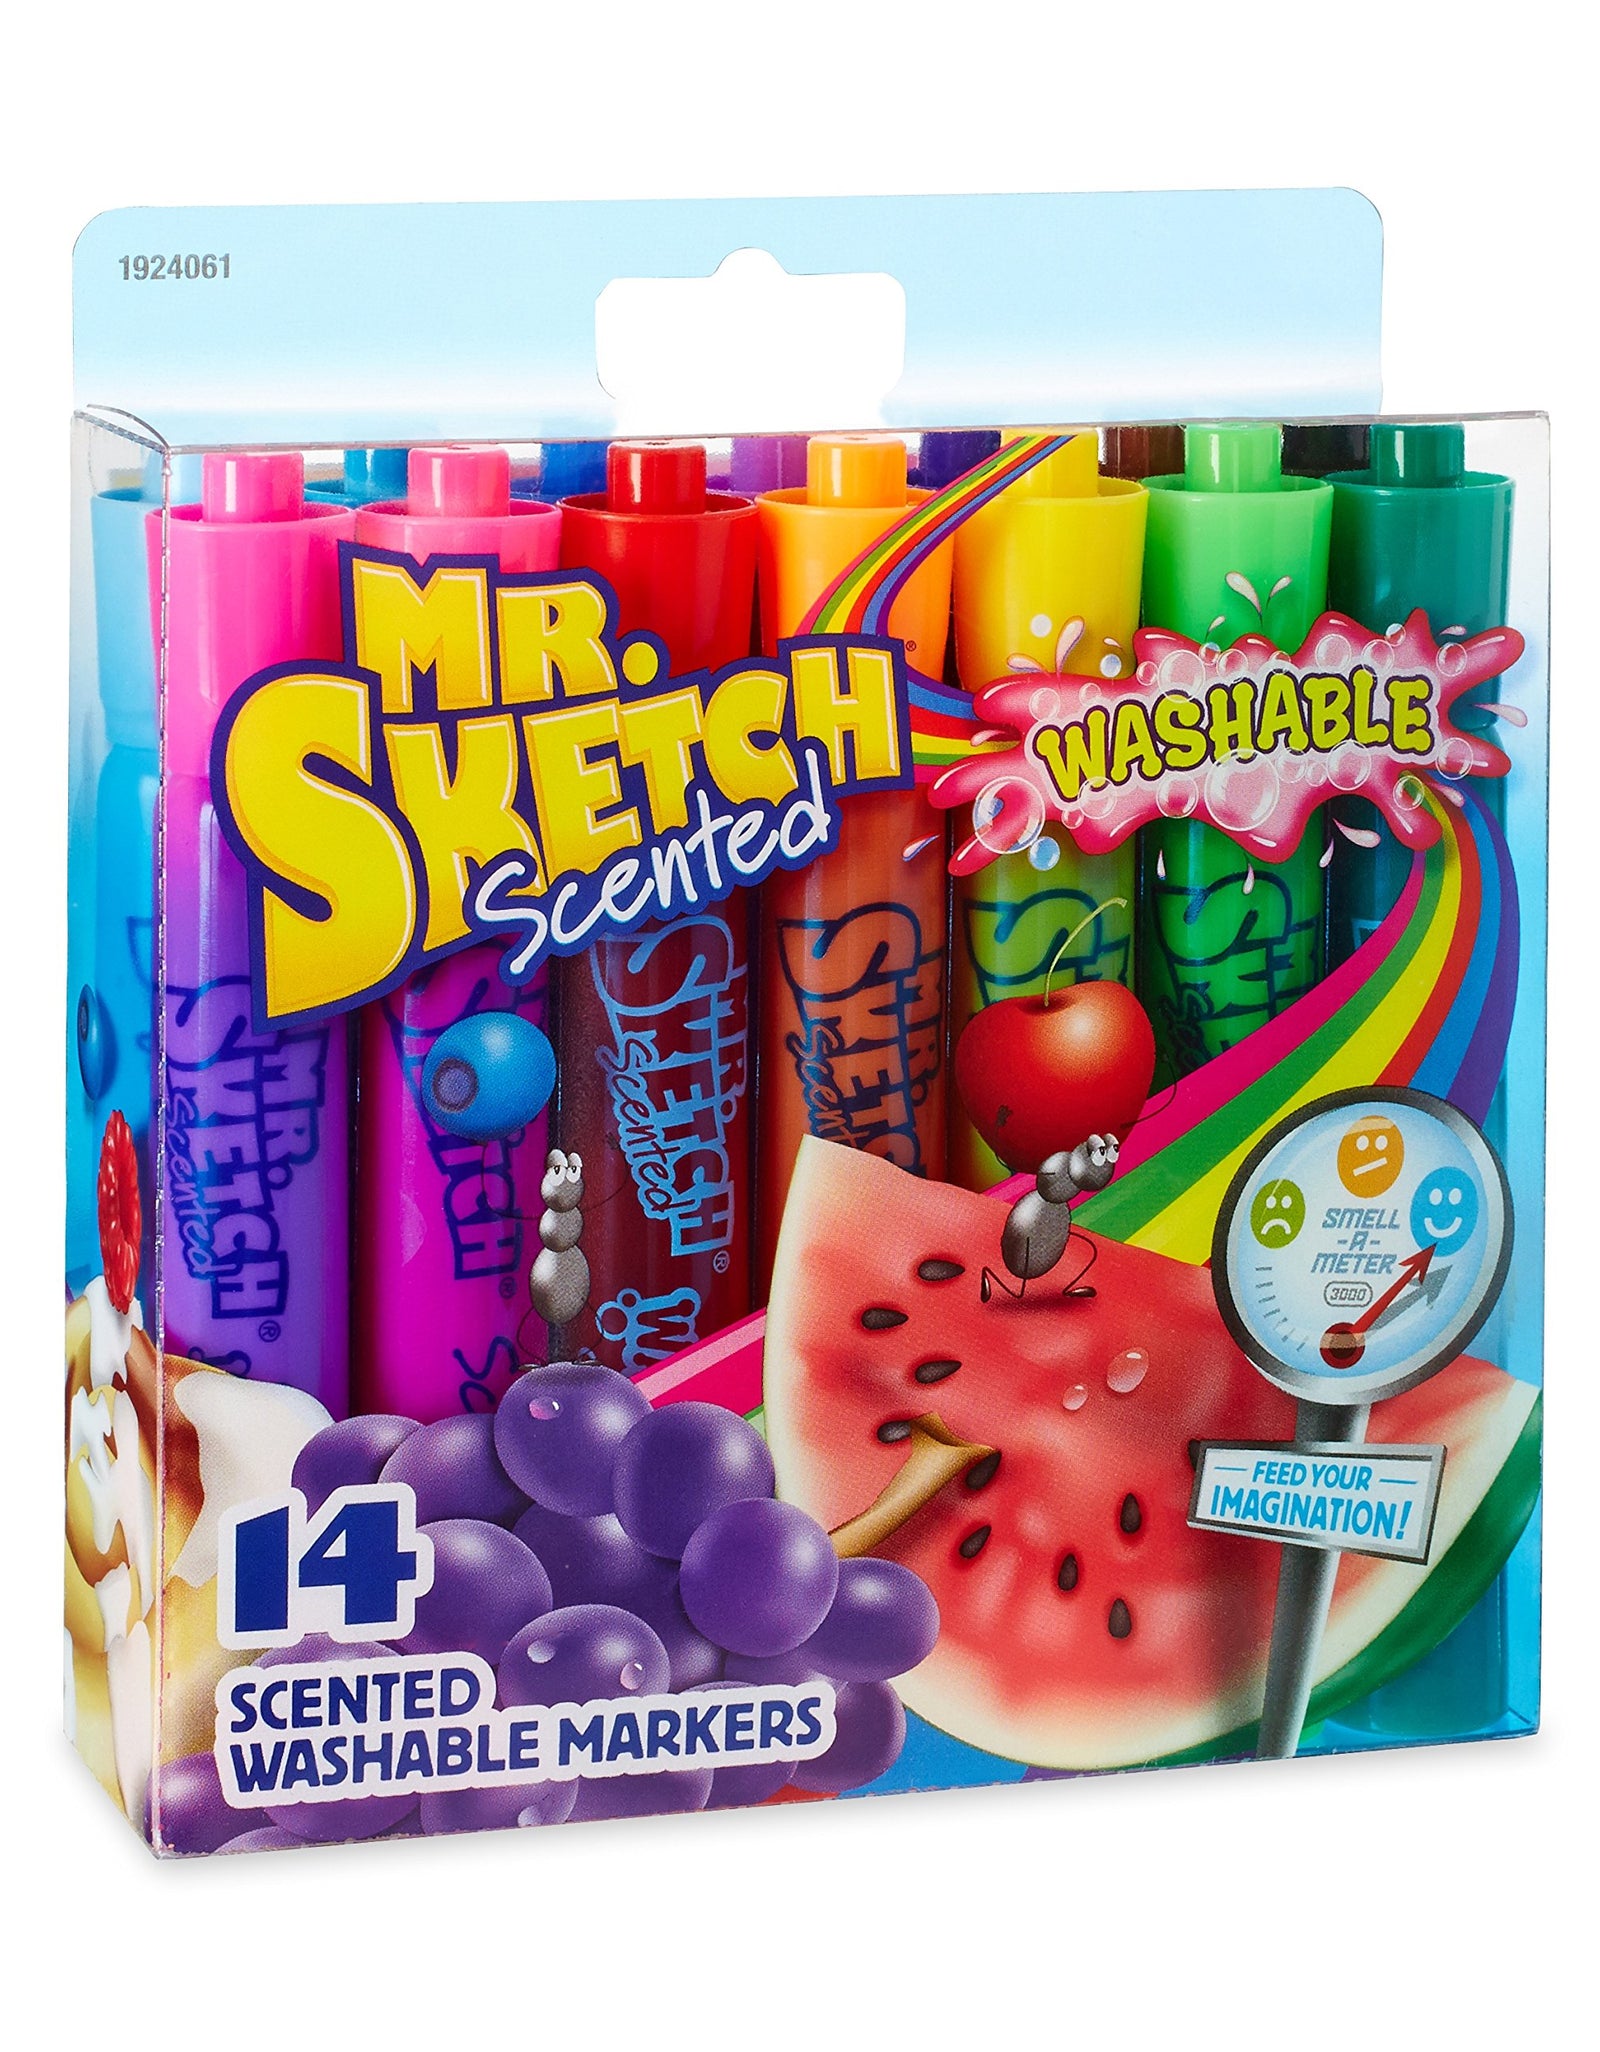 Mr. Sketch 1924061 Washable Scented Markers, Chisel Tip, Assorted Colors, 14-Count